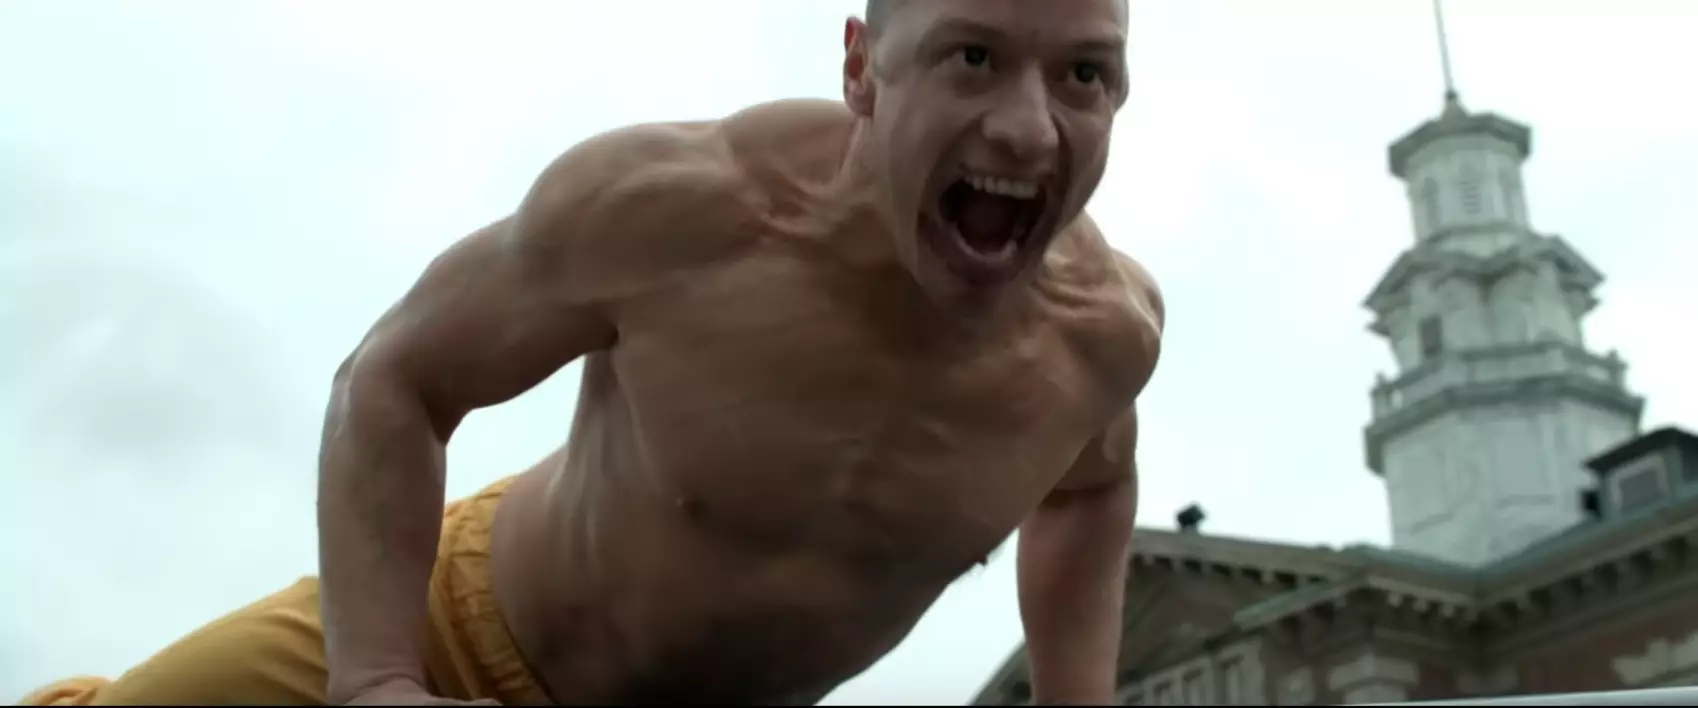 James McAvoy has certainly pounded on the muscle for this role.